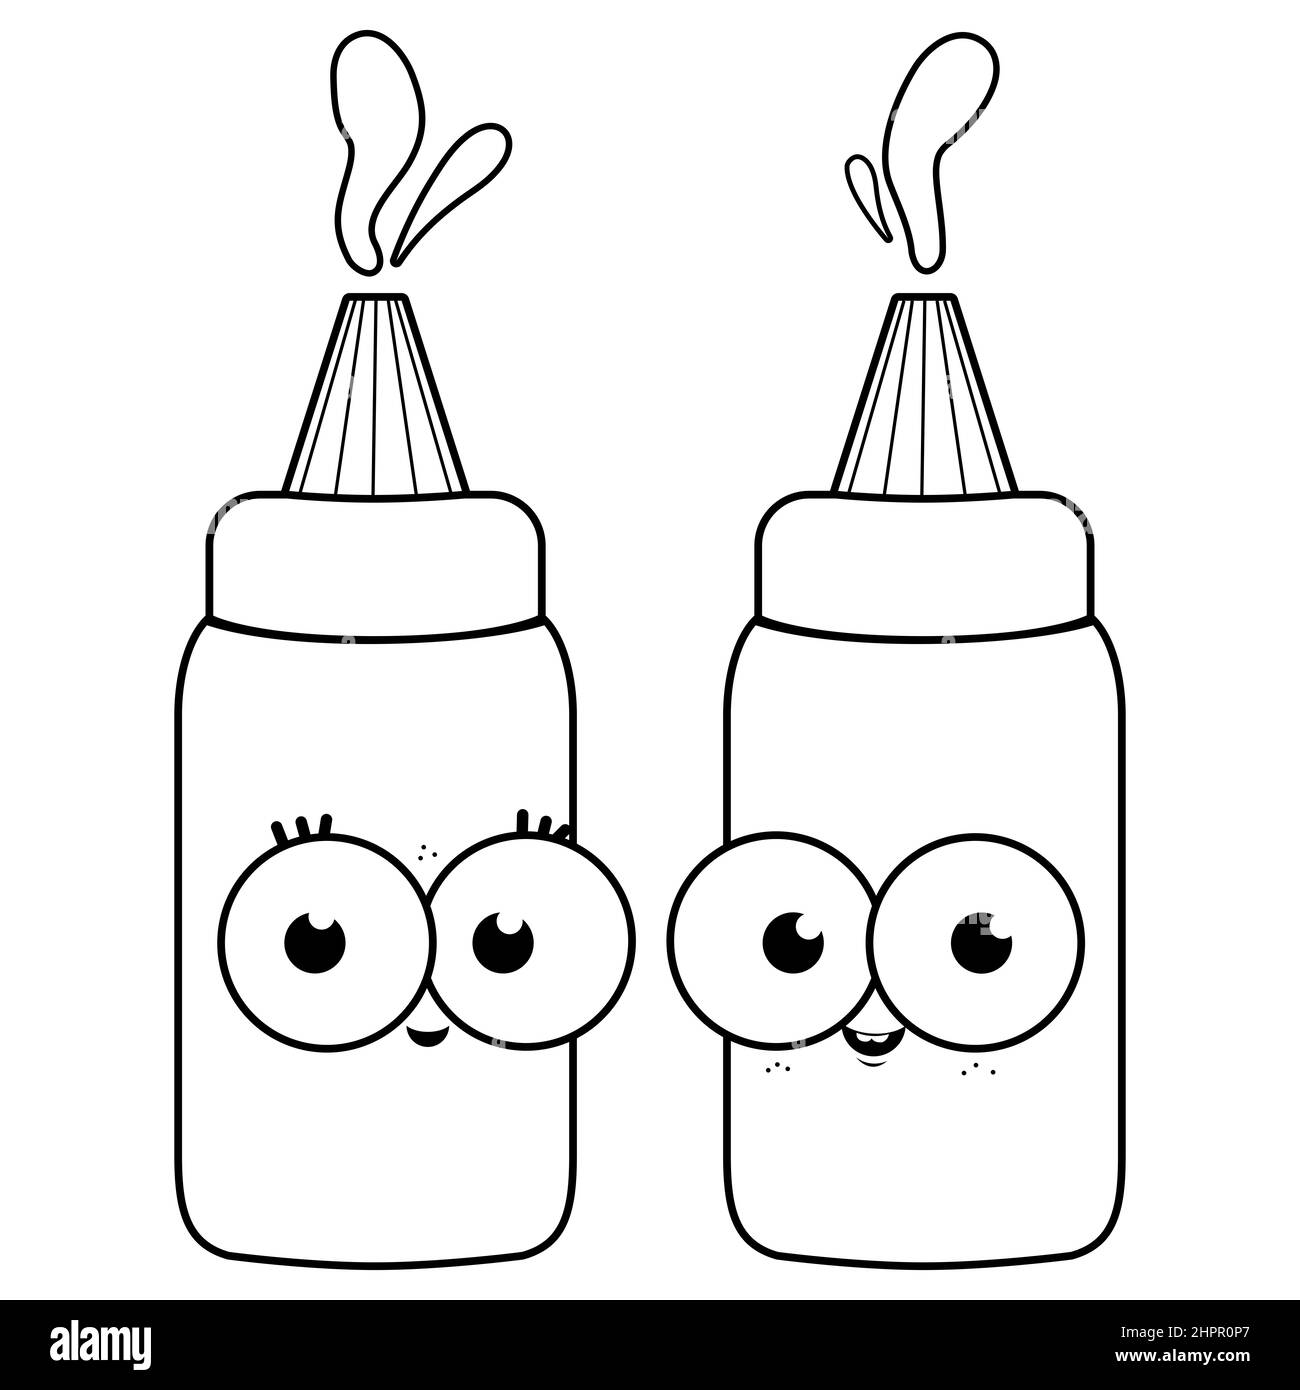 Cartoon bottles of tomato ketchup and mustard. Black and white coloring page Stock Photo